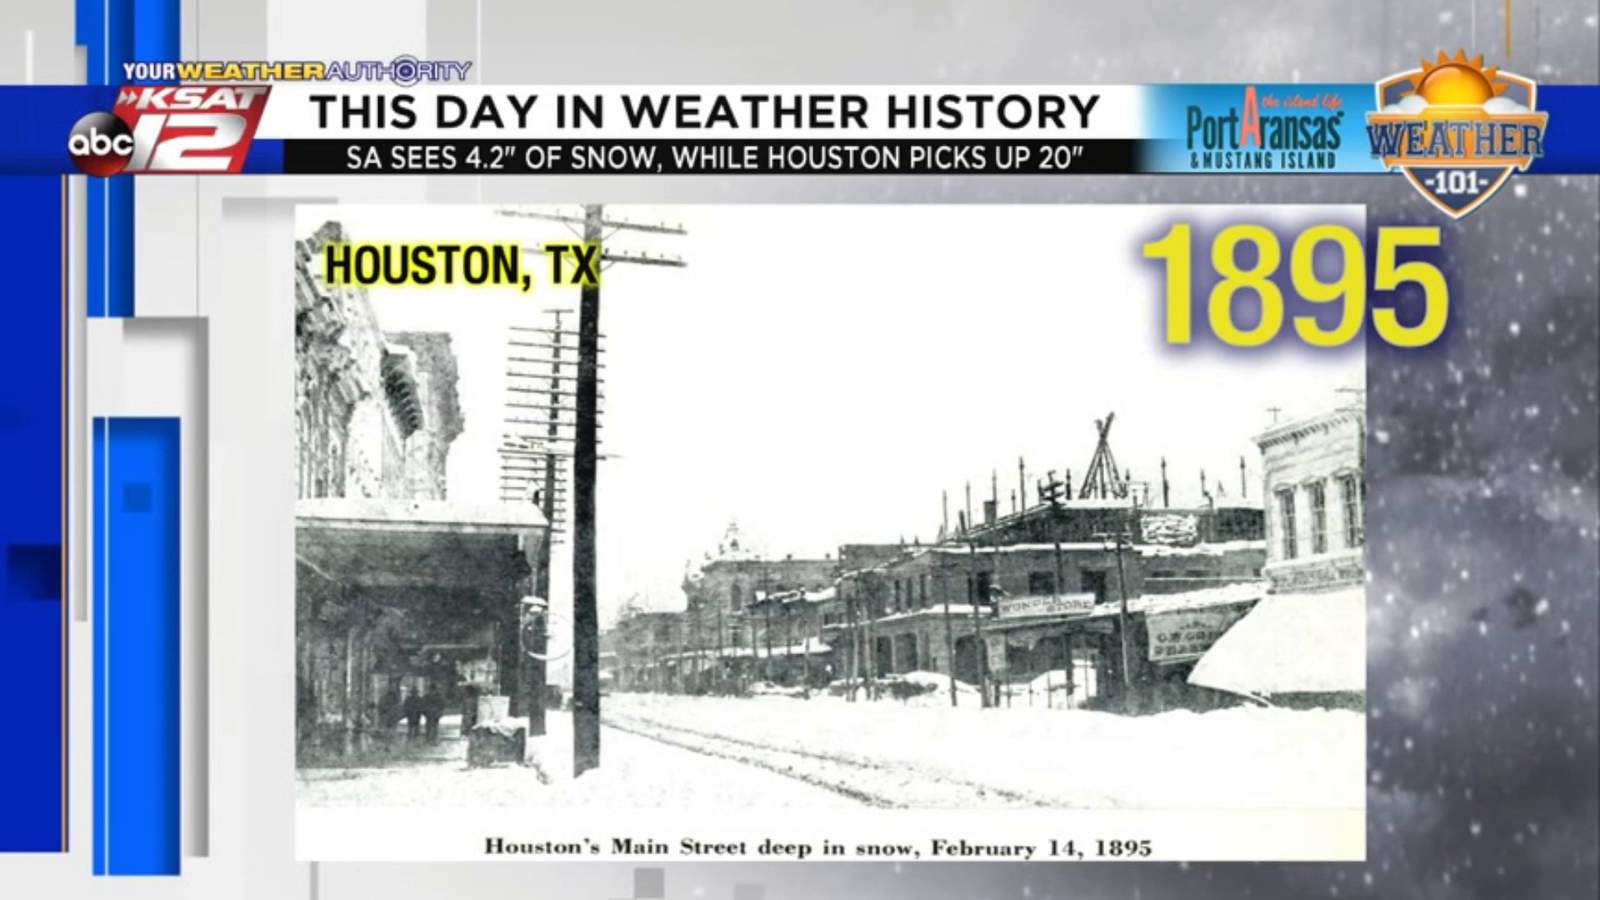 This Day in Weather History: February 14th